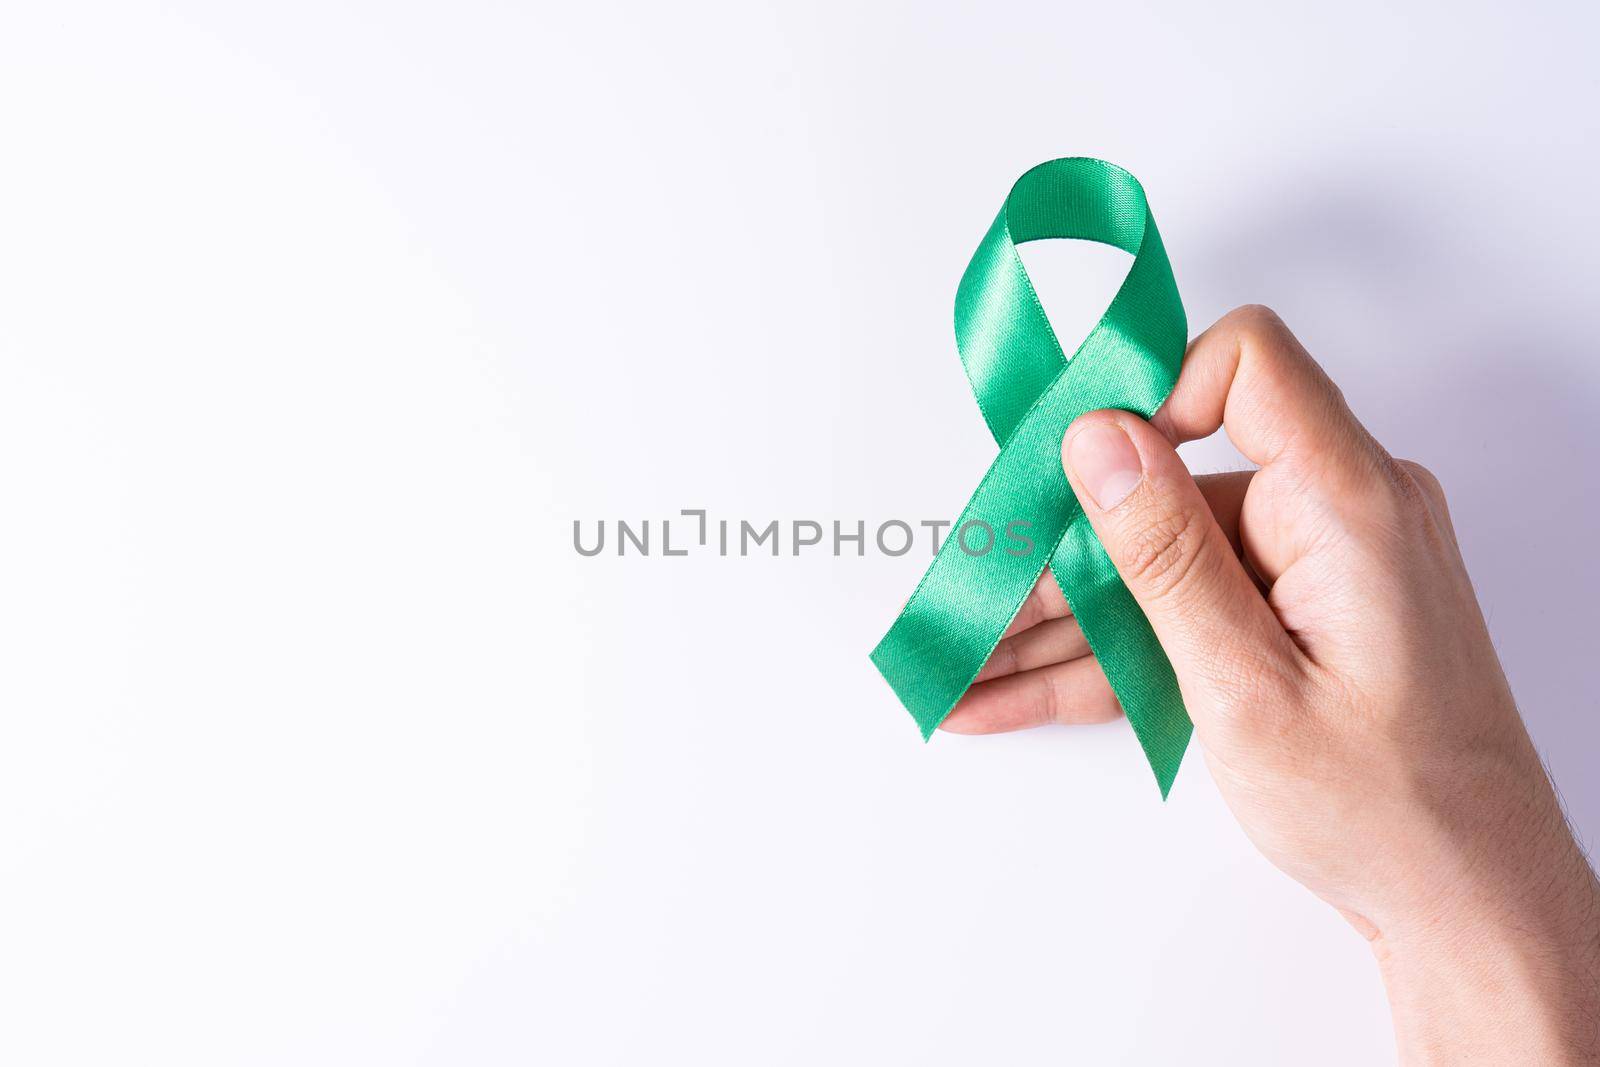 World kidney day, hands holding green ribbon awareness of kidney disease isolated white background.